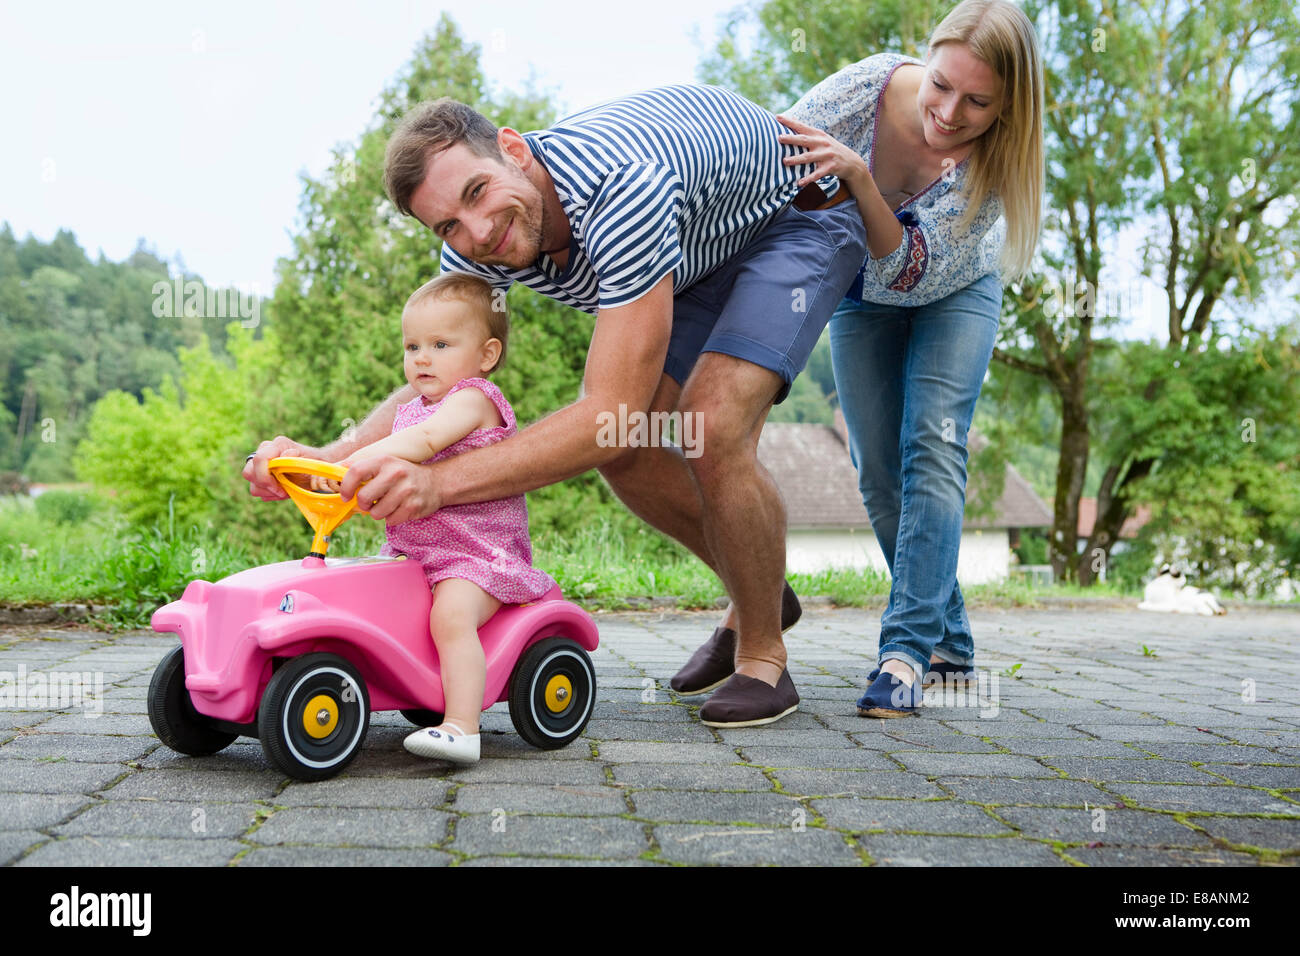 Mid adult couple pushing baby daughter on toy car in garden Stock Photo